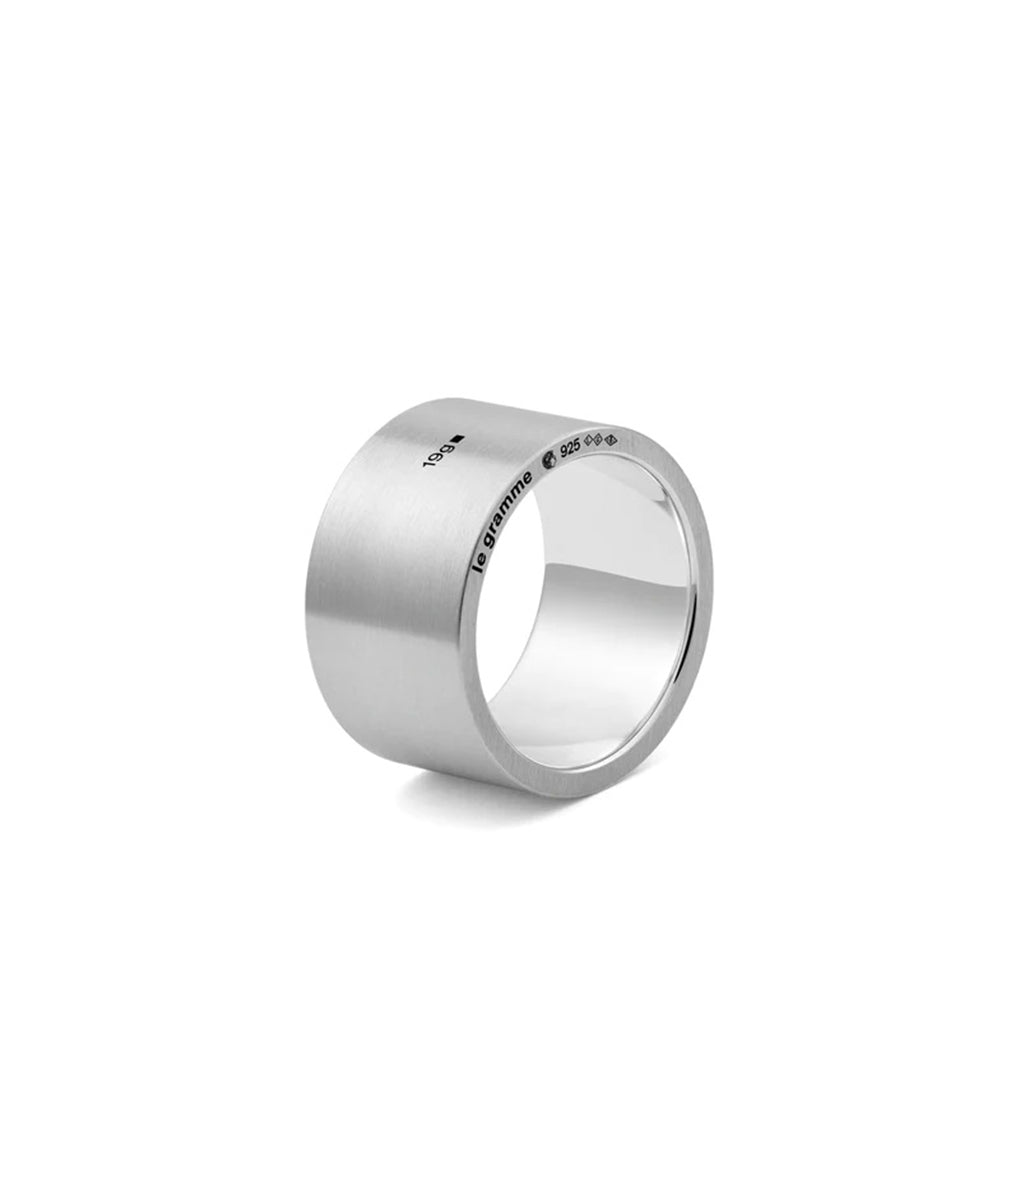 LE GRAMME "19G RIBBON RING BRUSHED" (NEW)